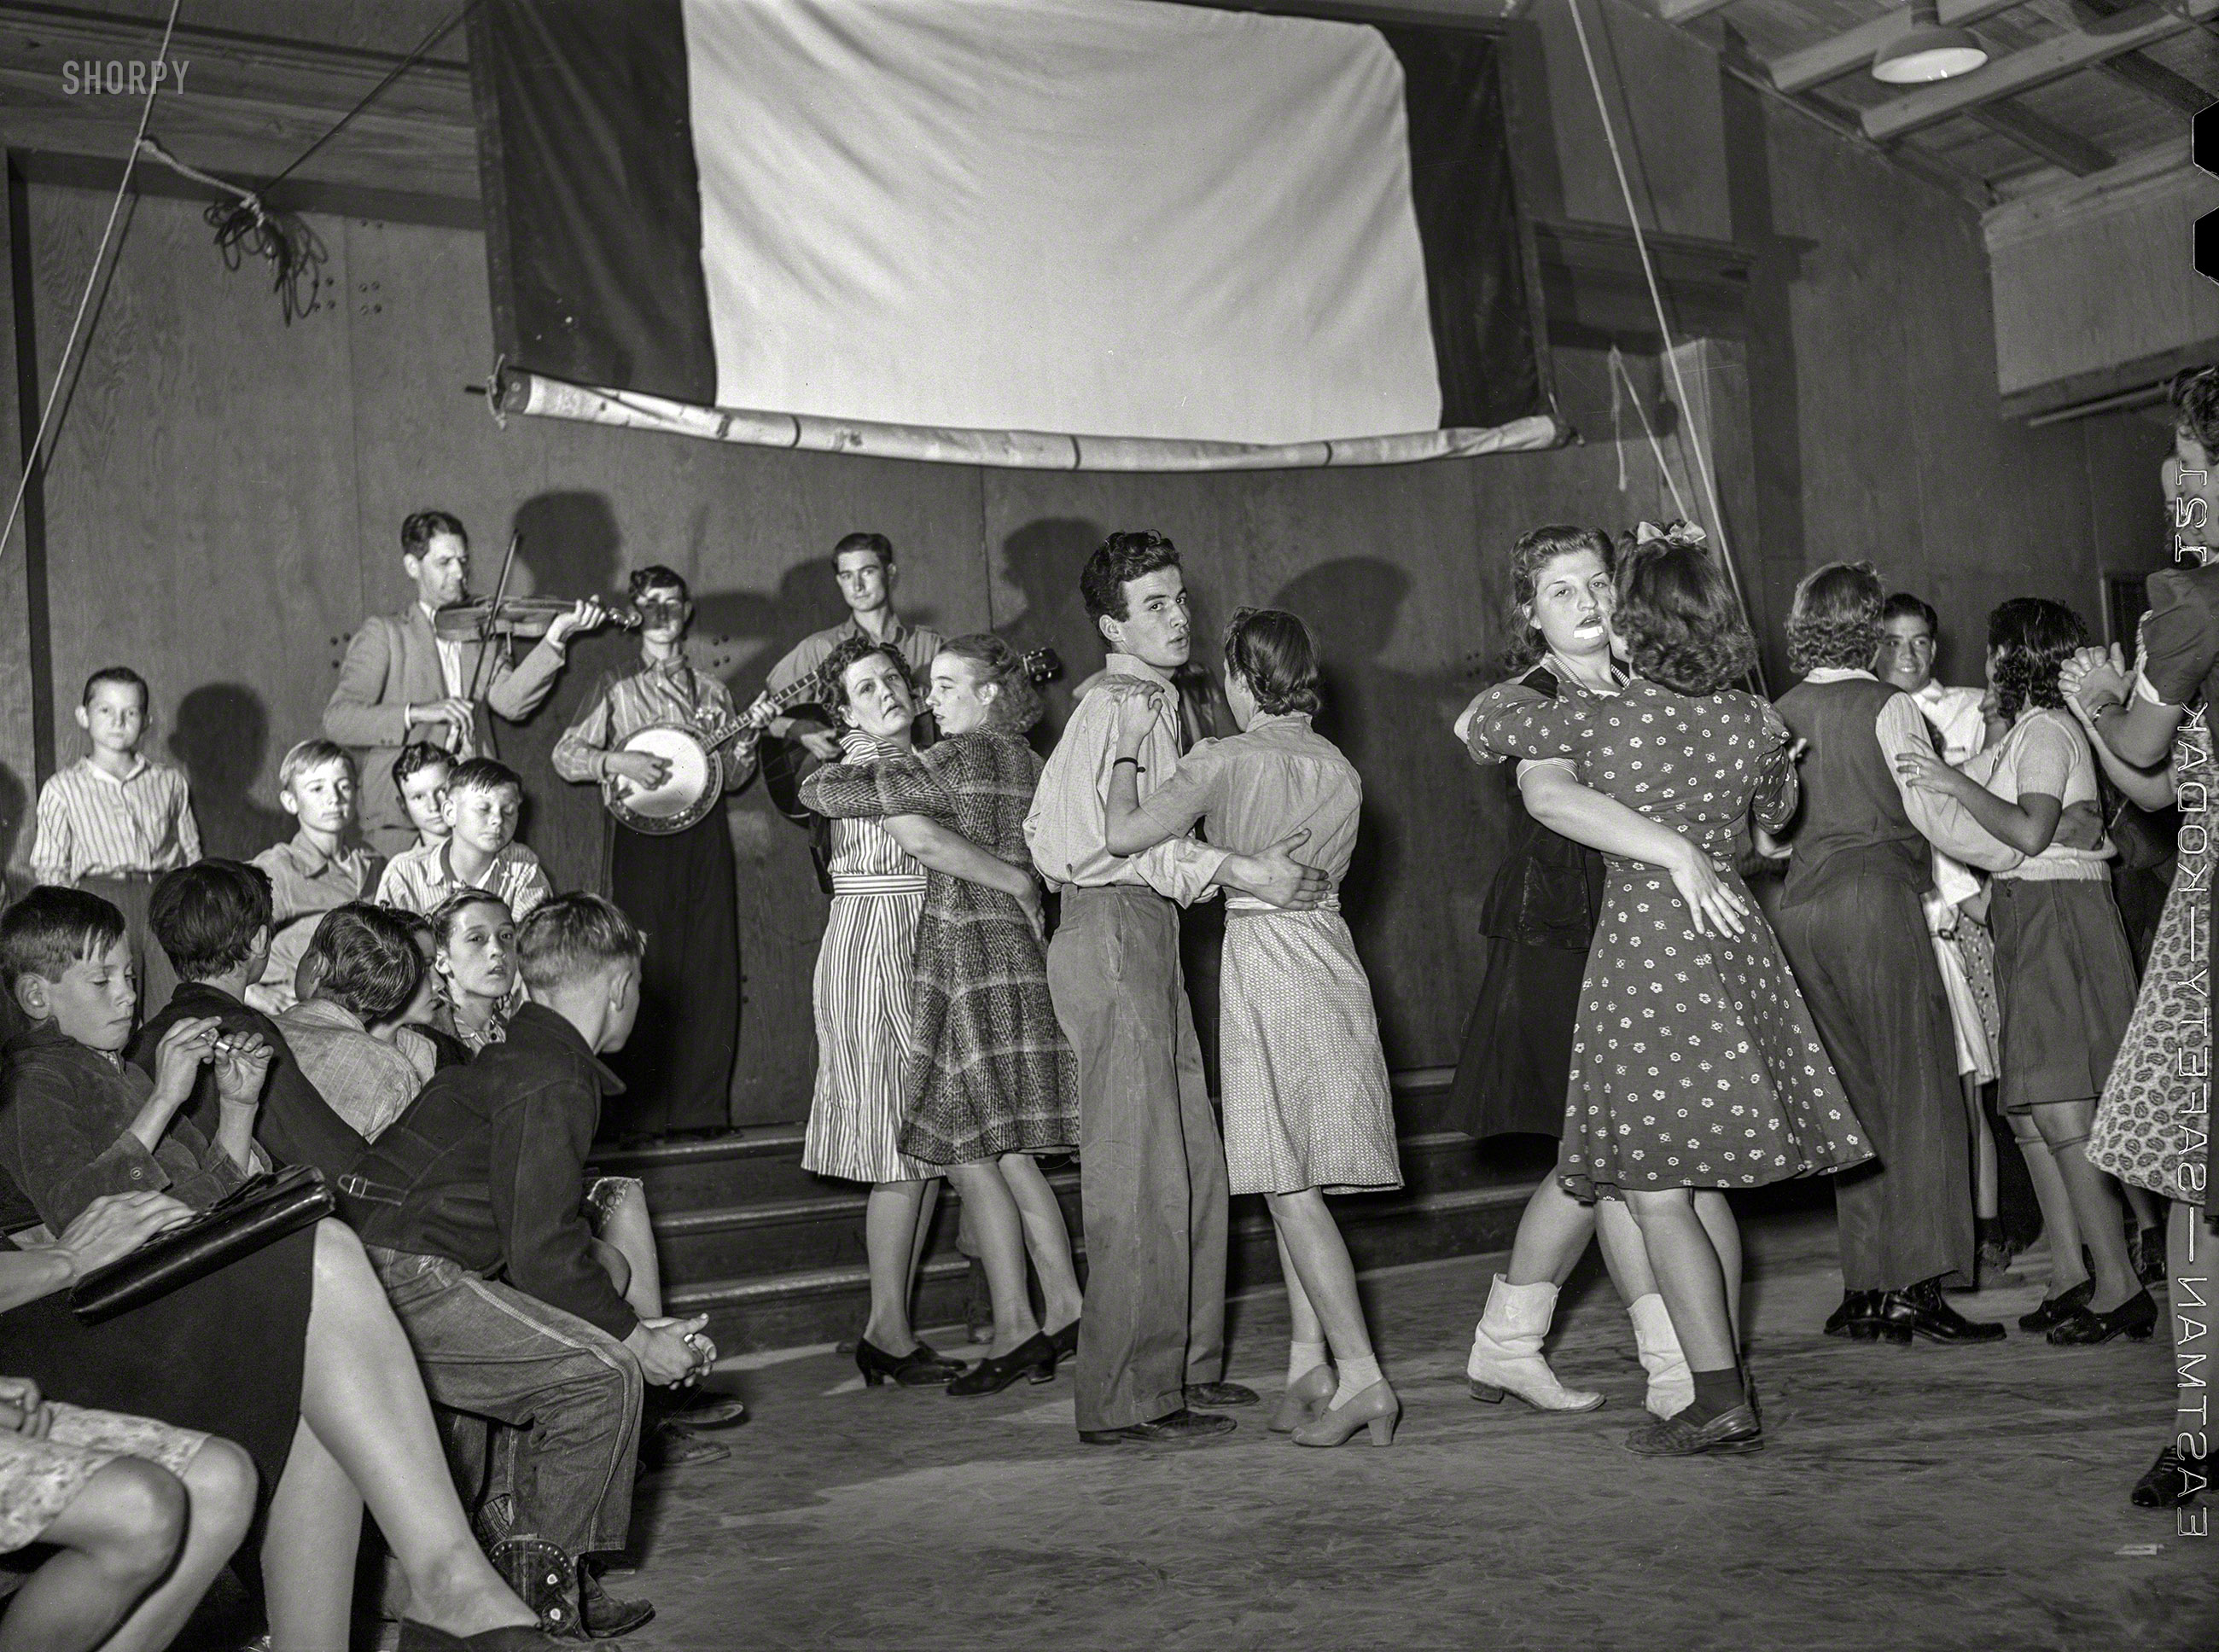 February 1942. "Farm Security Administration Mercer G. Evans camp in Weslaco, Texas. Drake family playing for a Saturday night dance." Medium format negative by the under-appreciated Arthur Rothstein. View full size.